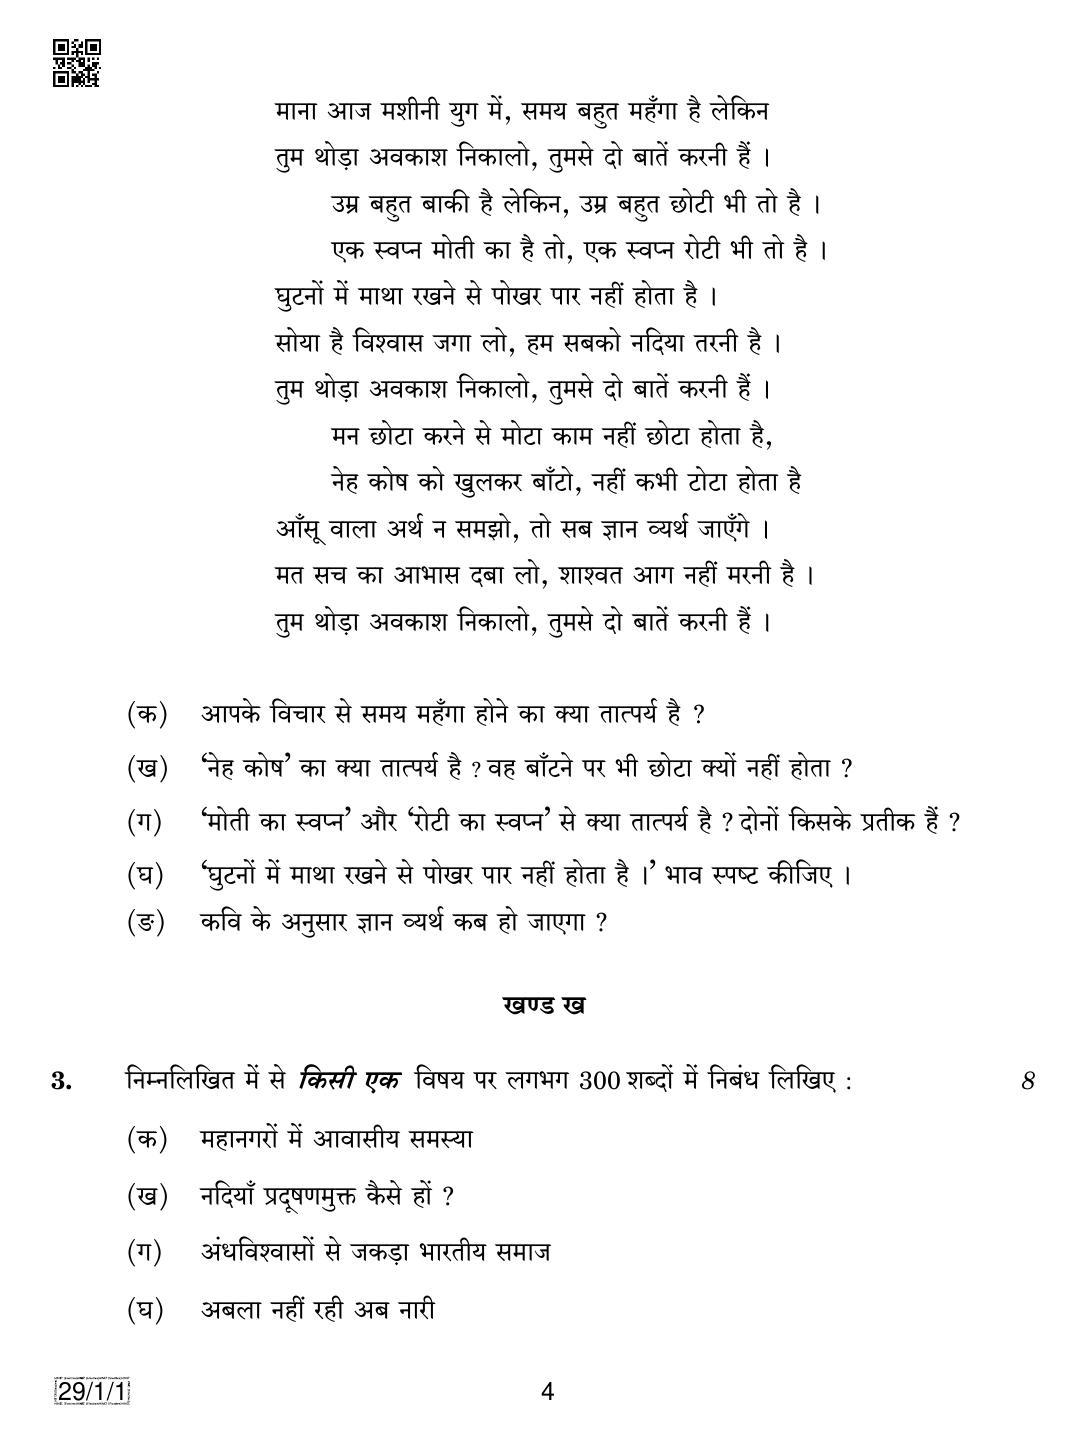 CBSE Class 12 29-1-1 HINDI ELECTIVE 2019 Compartment Question Paper - Page 4